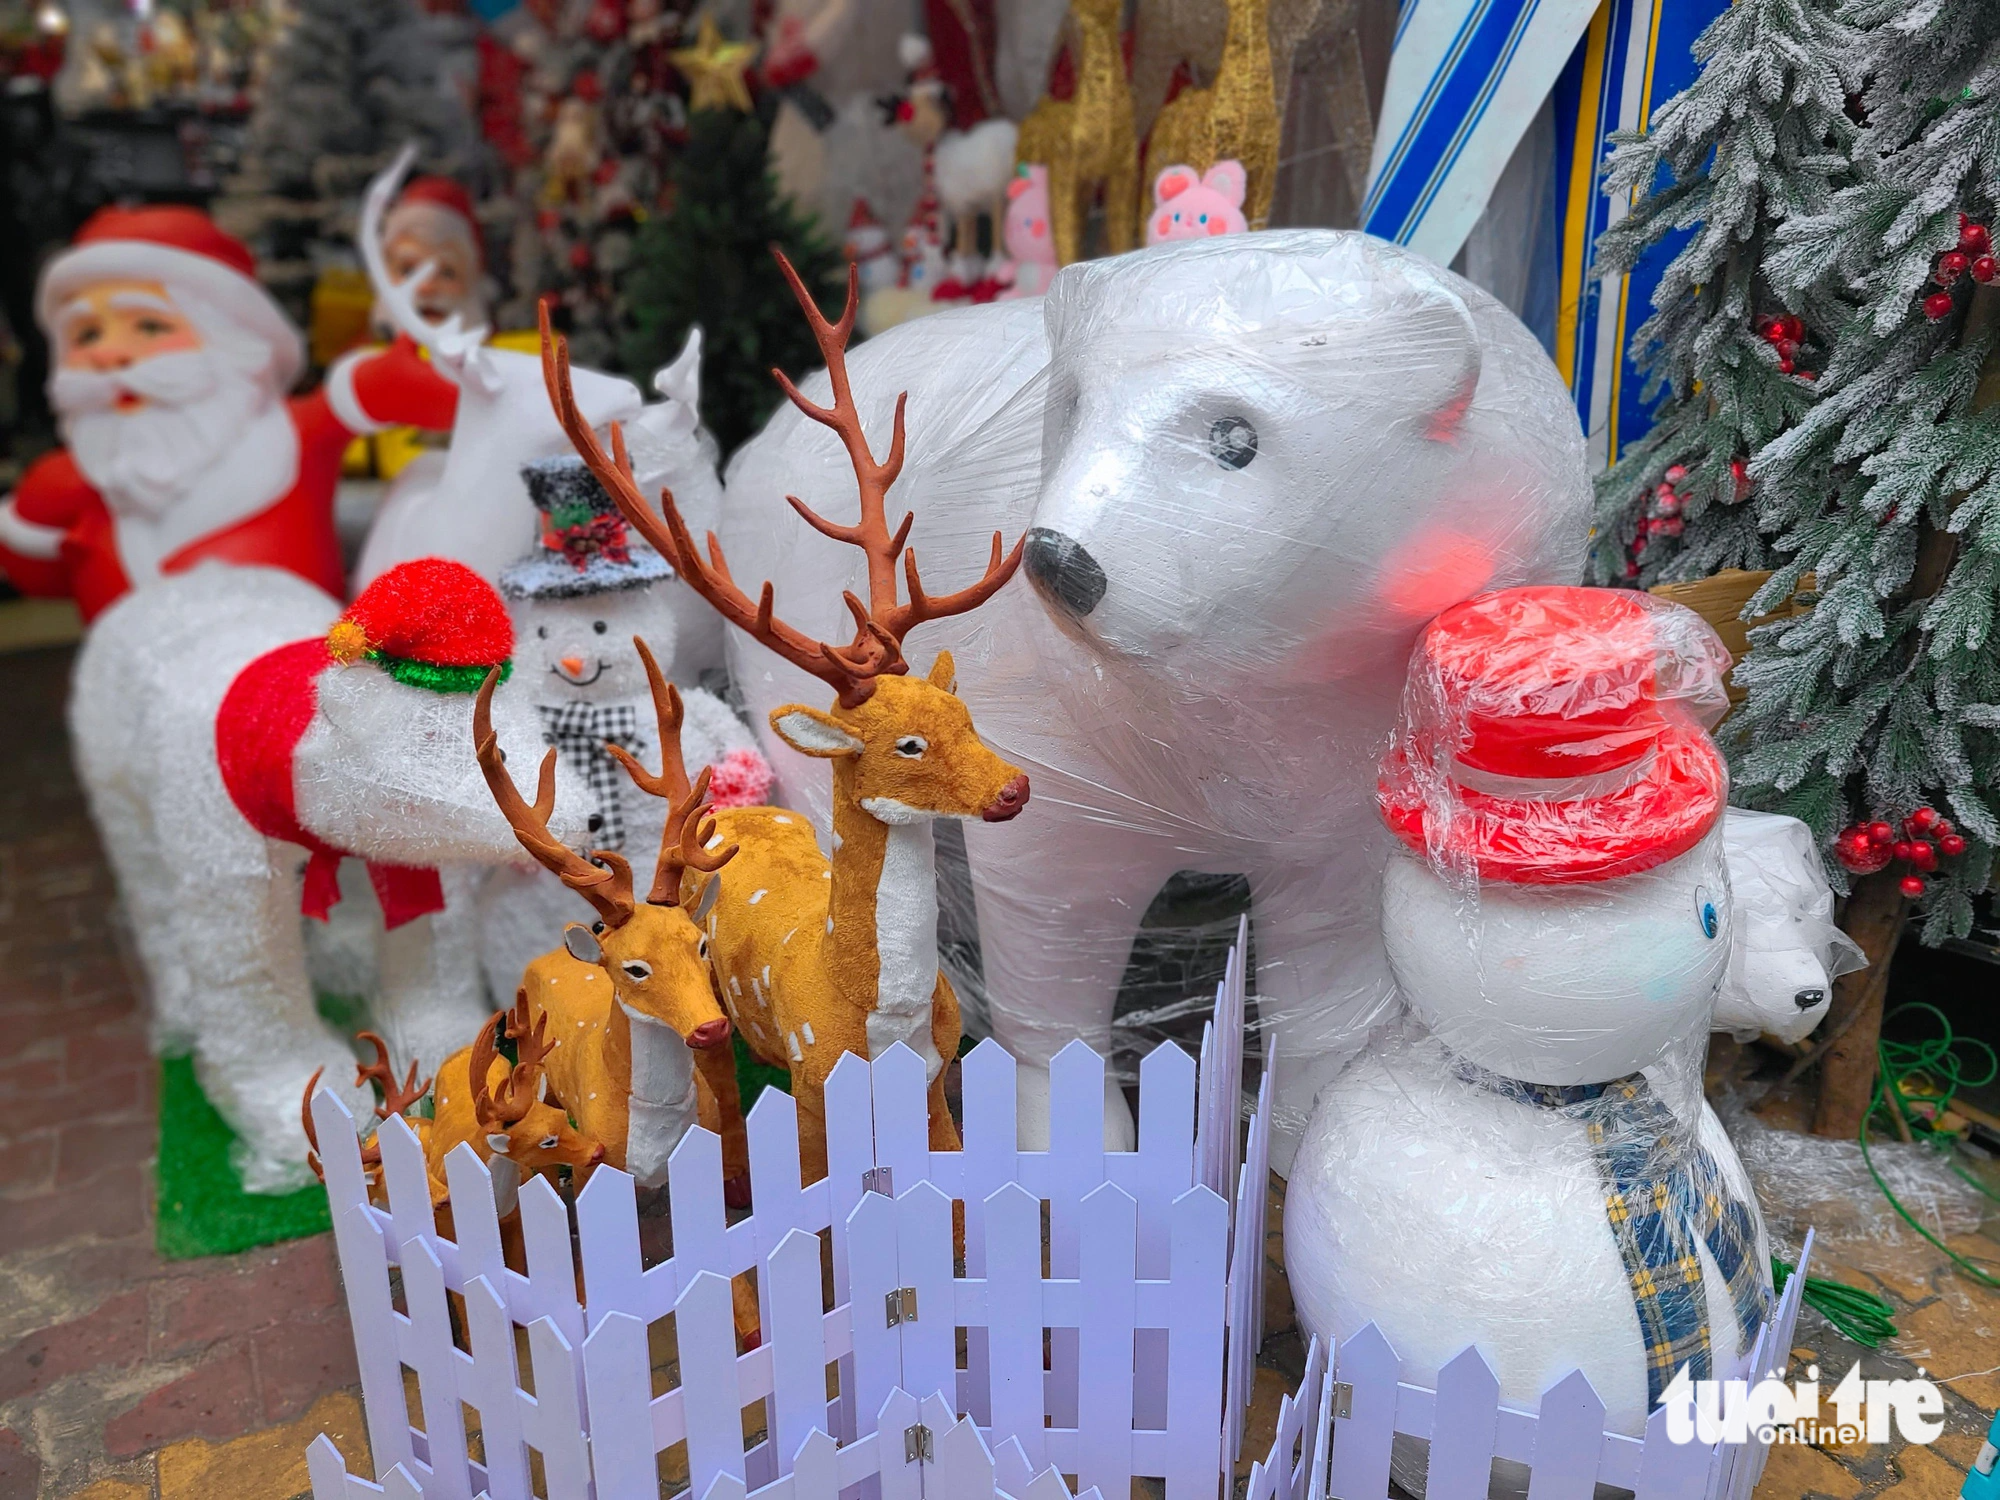 Christmas decorations are displayed at a shop in Ho Chi Minh City. Photo: Nhat Xuan / Tuoi Tre